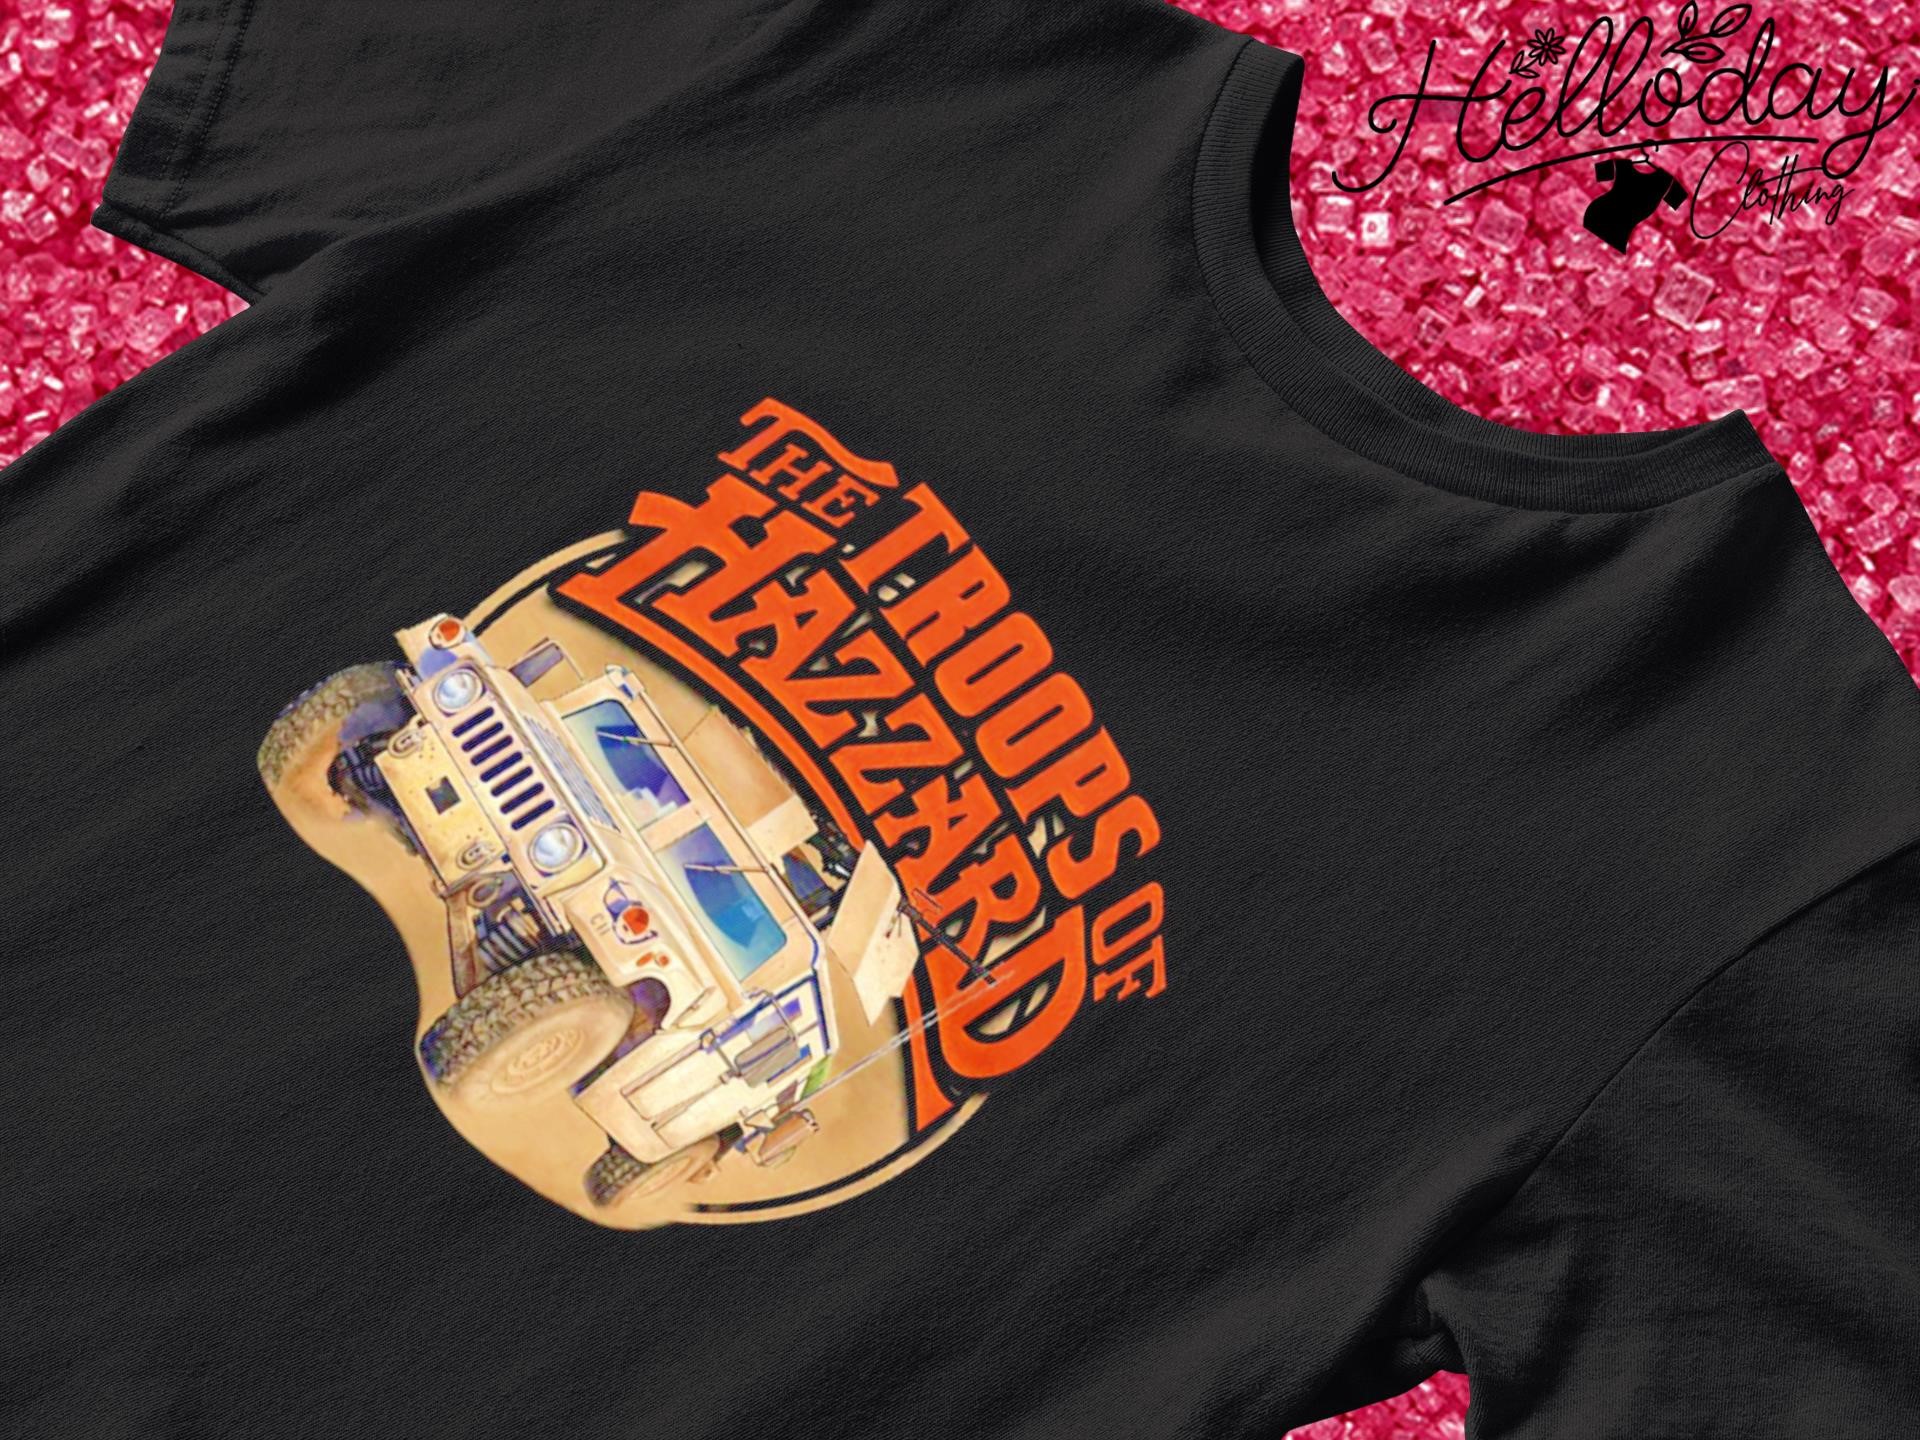 The Troops of hazzard shirt